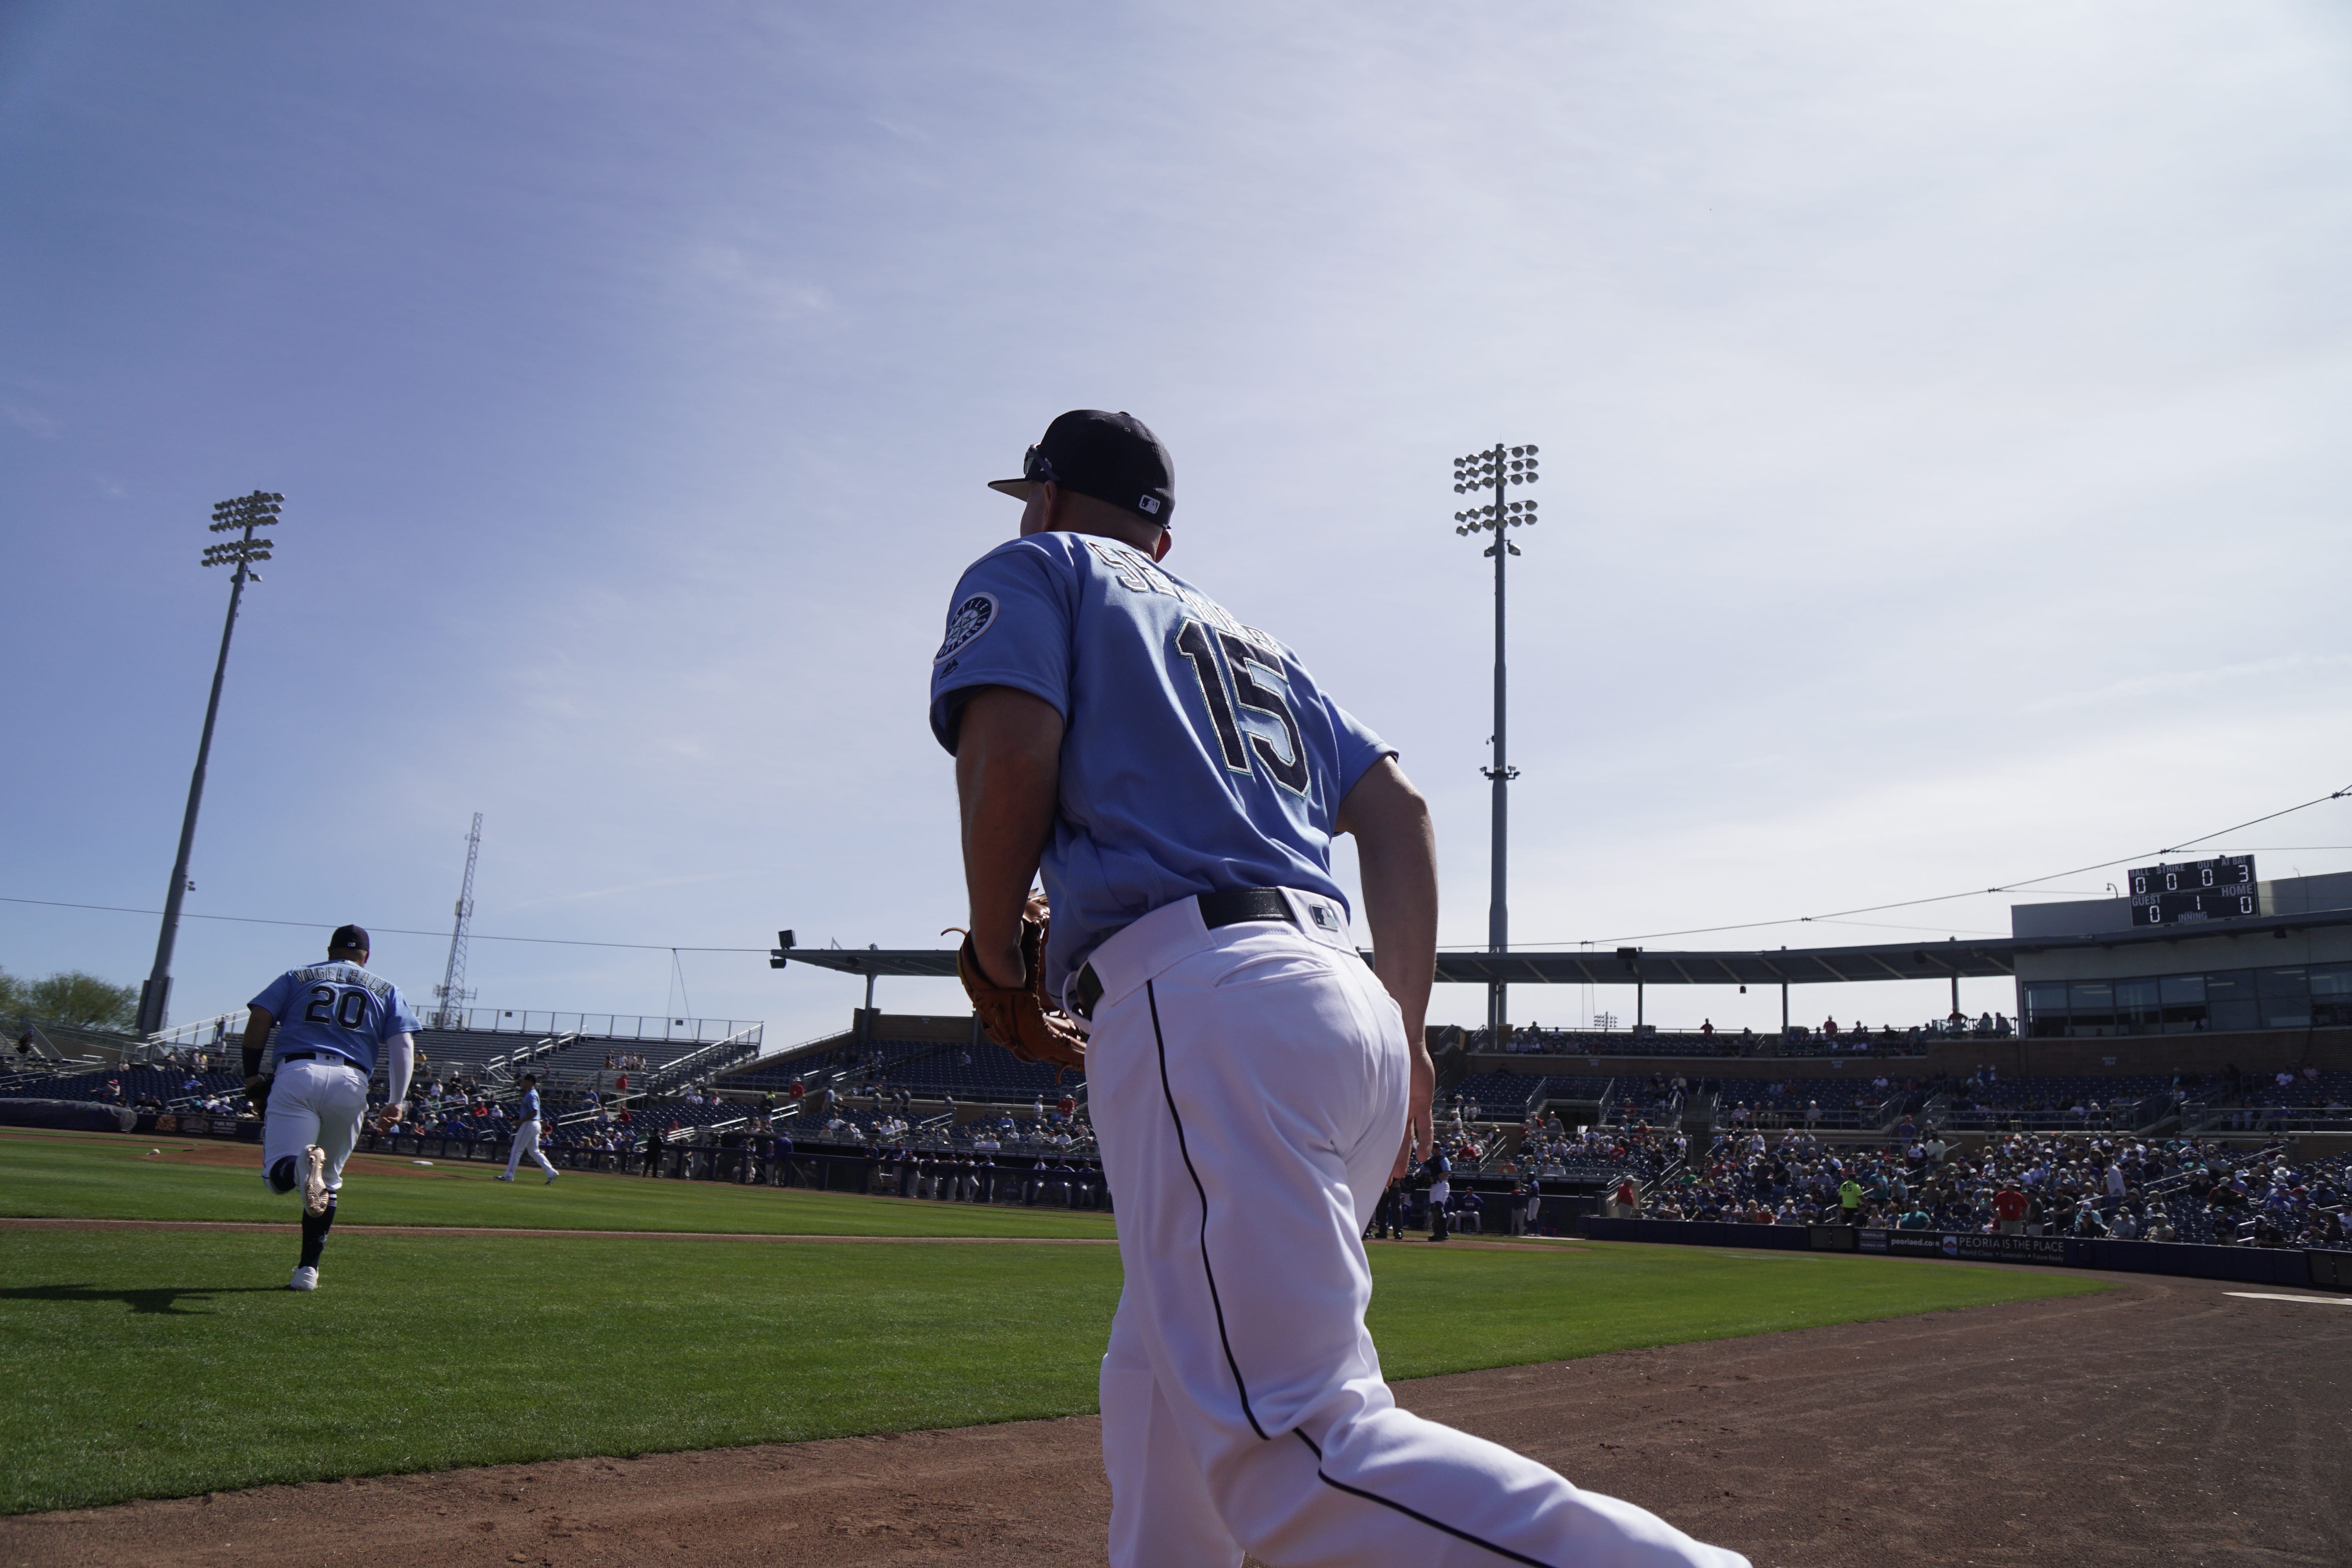 Mariners Spring Training — Day 16, by Mariners PR